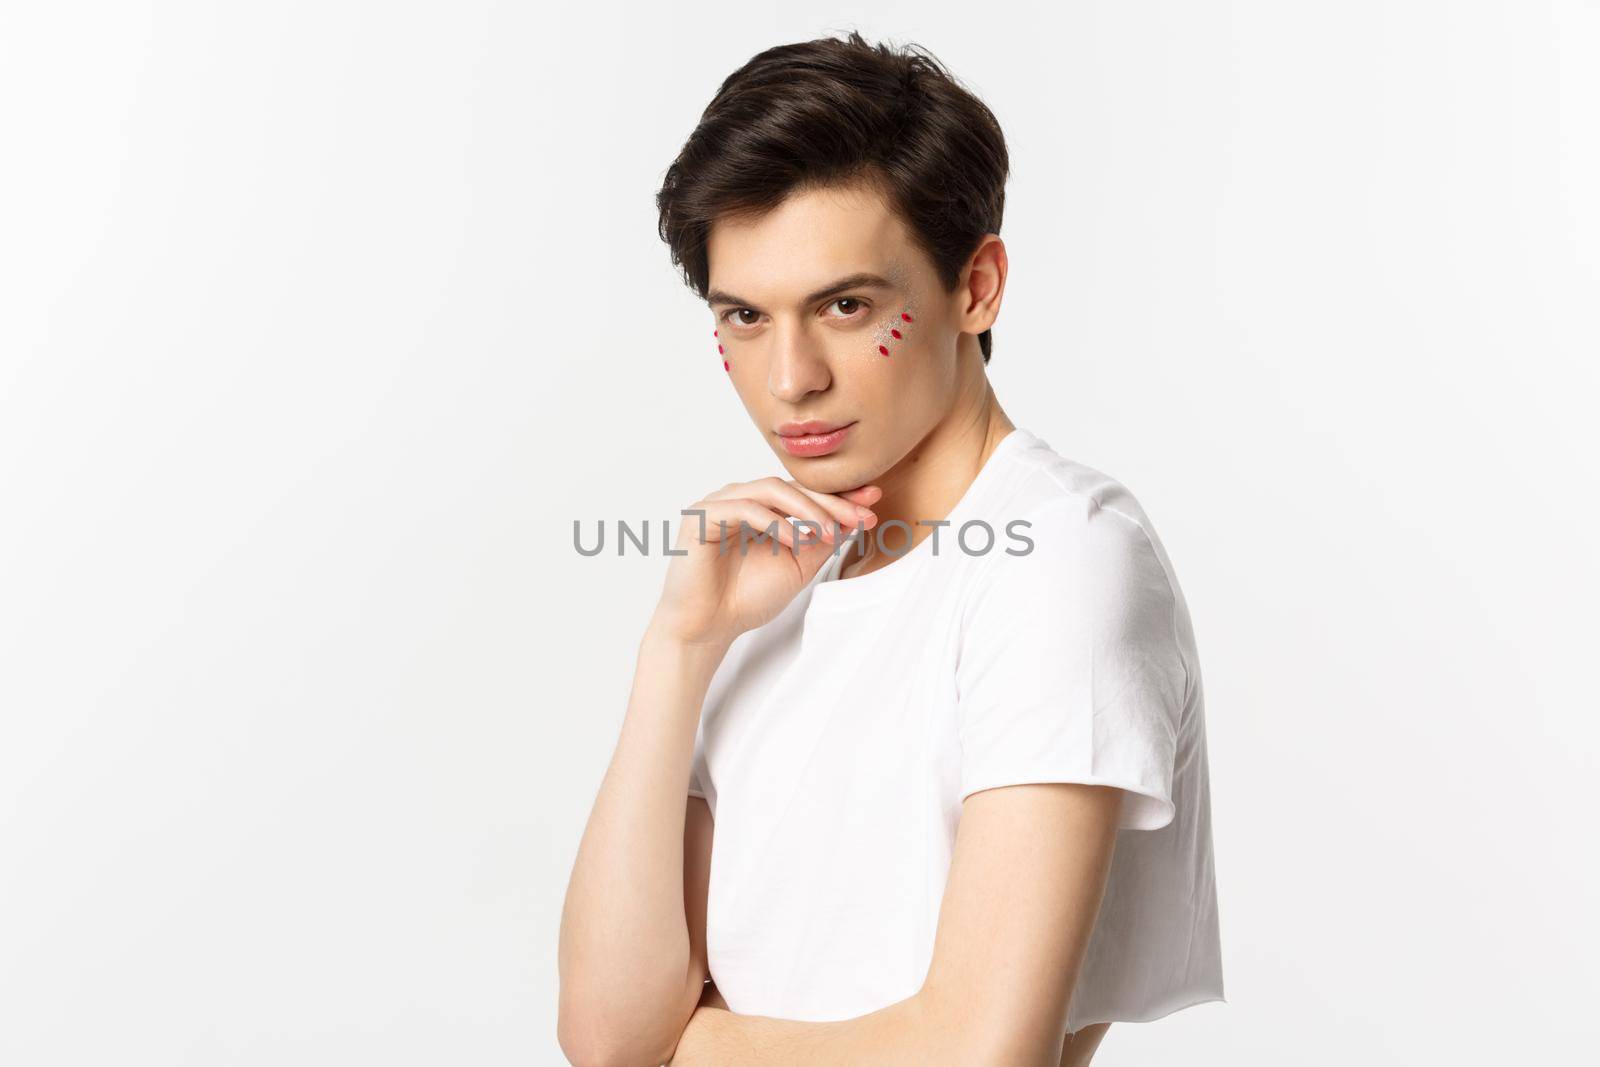 People, lgbtq and beauty concept. Beautiful androgynous male model with glitter on face, wearing crop top, looking with piercing eyes at camera, standing over white background.